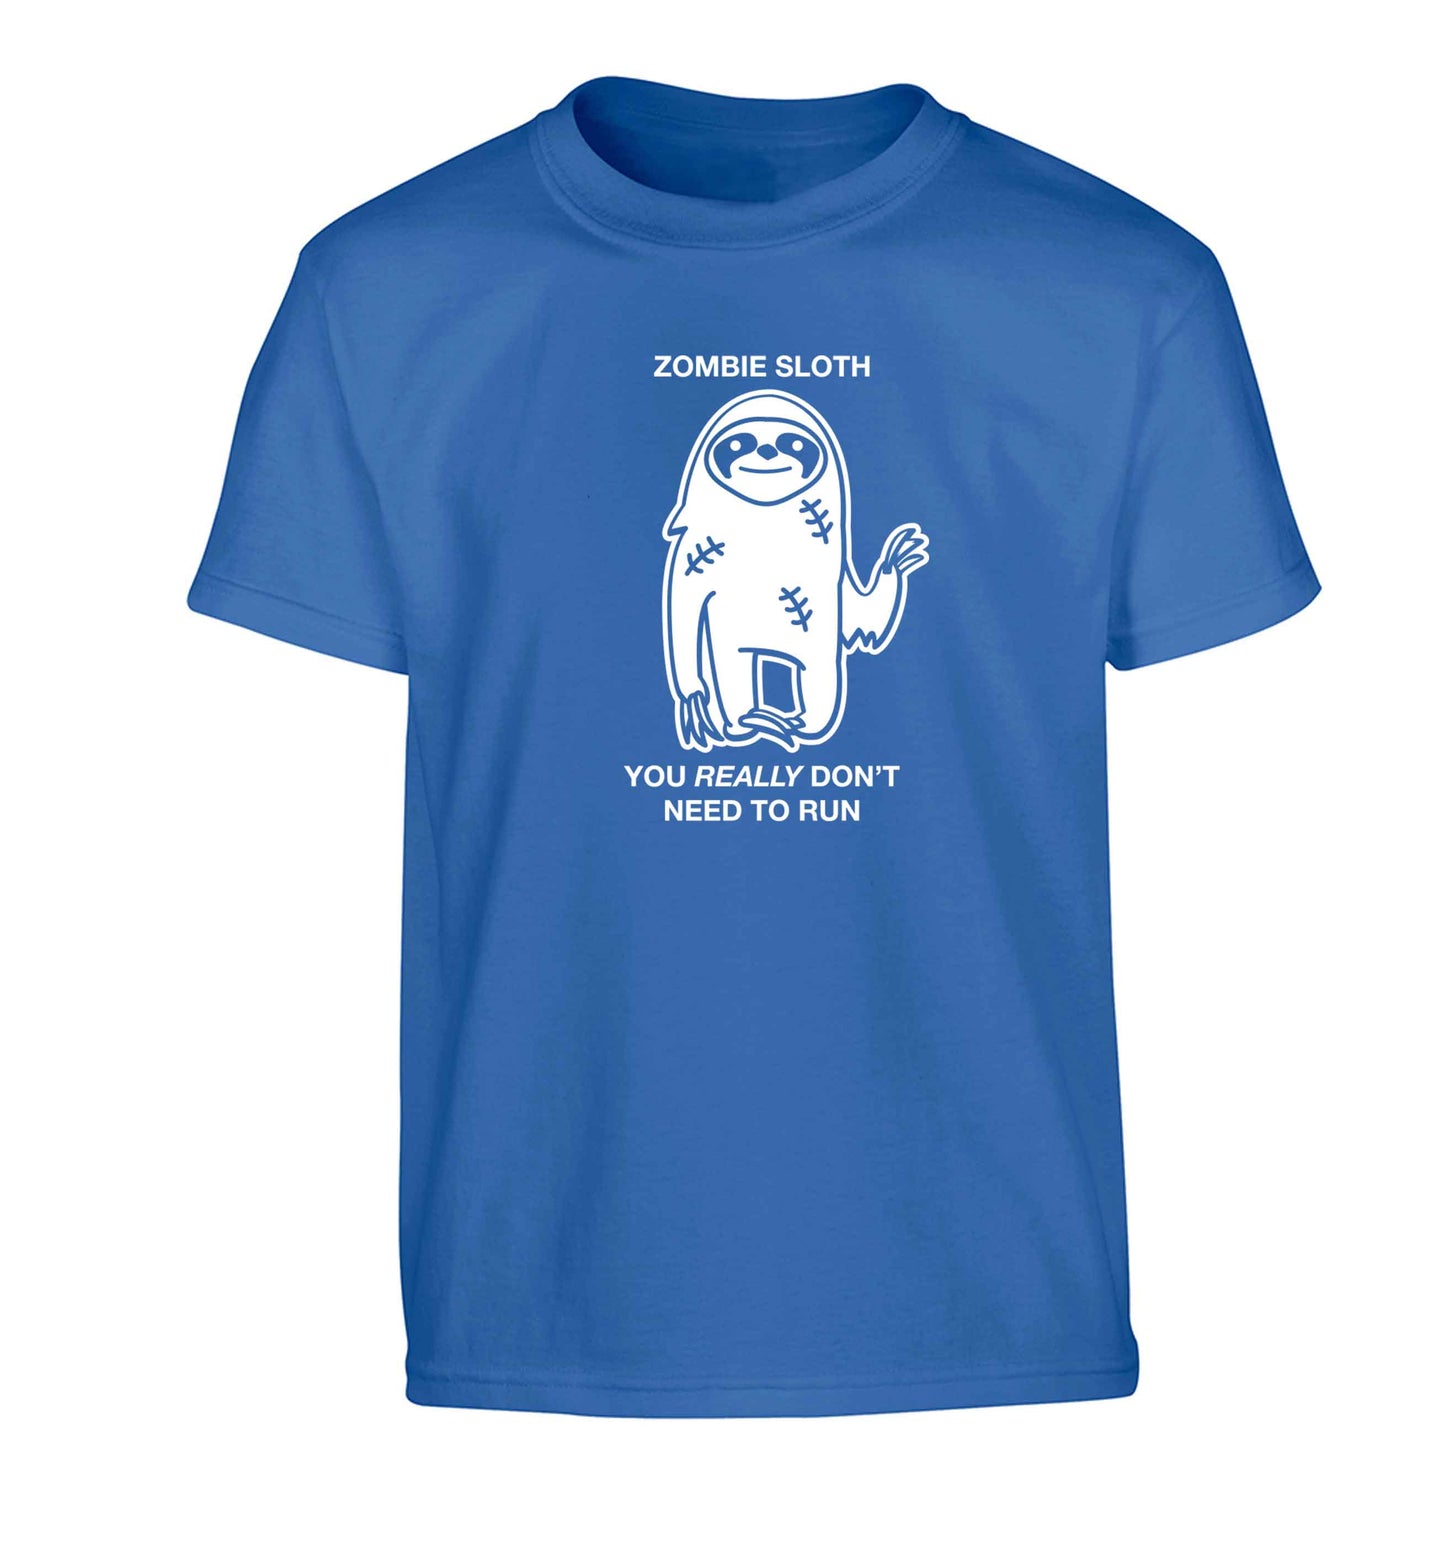 Zombie sloth you really don't need to run Children's blue Tshirt 12-13 Years